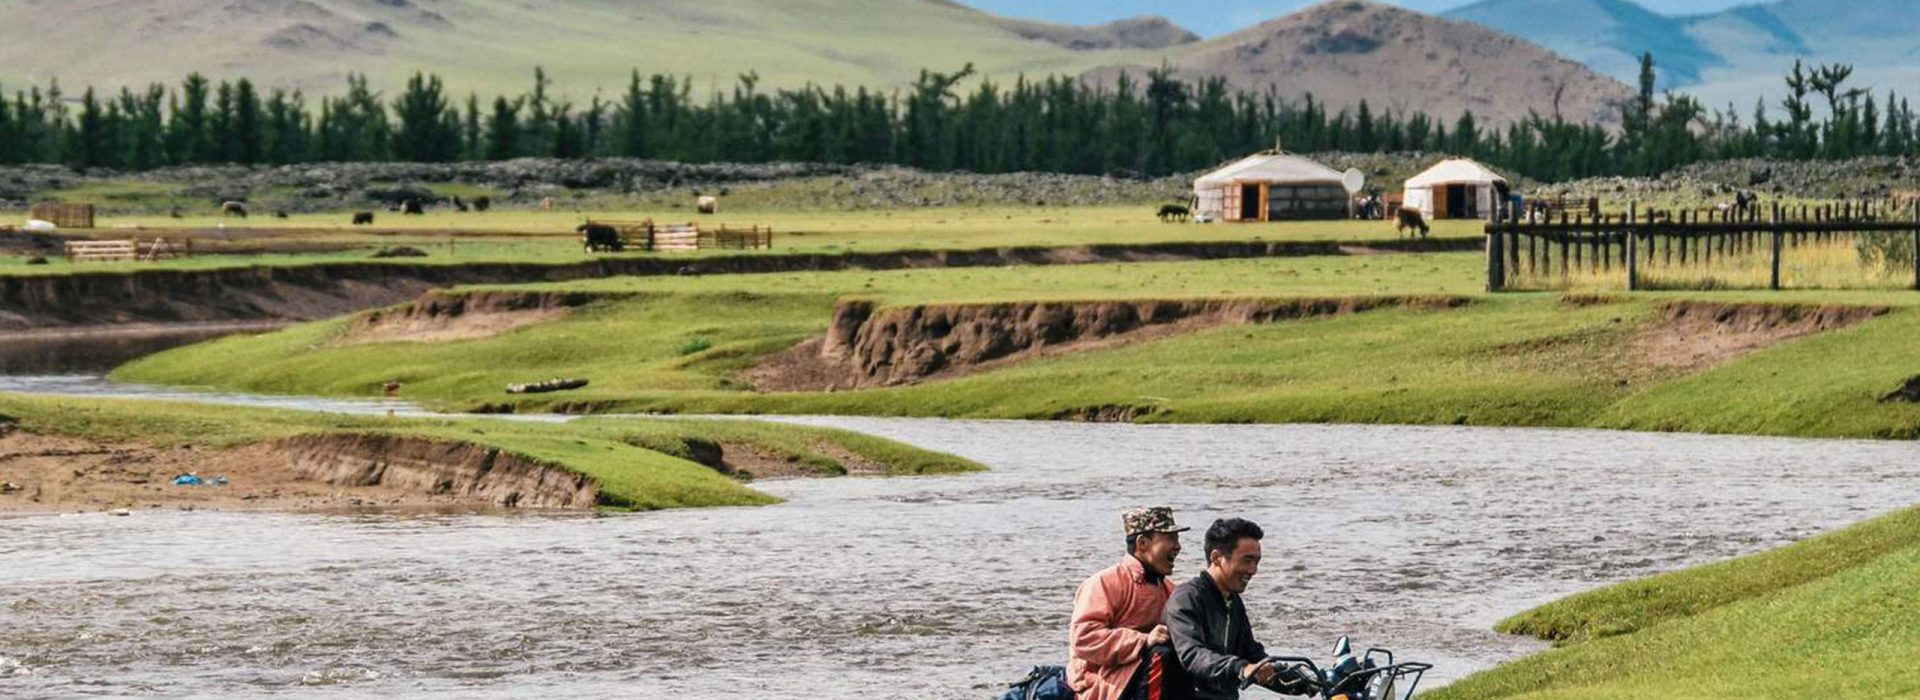 Ride on the vast Mongolian Steppe and try the real nomadic lifestyle of the locals. Sleep in yurts, dine in the open air and ride into serenity. Simply the best off-road experience.